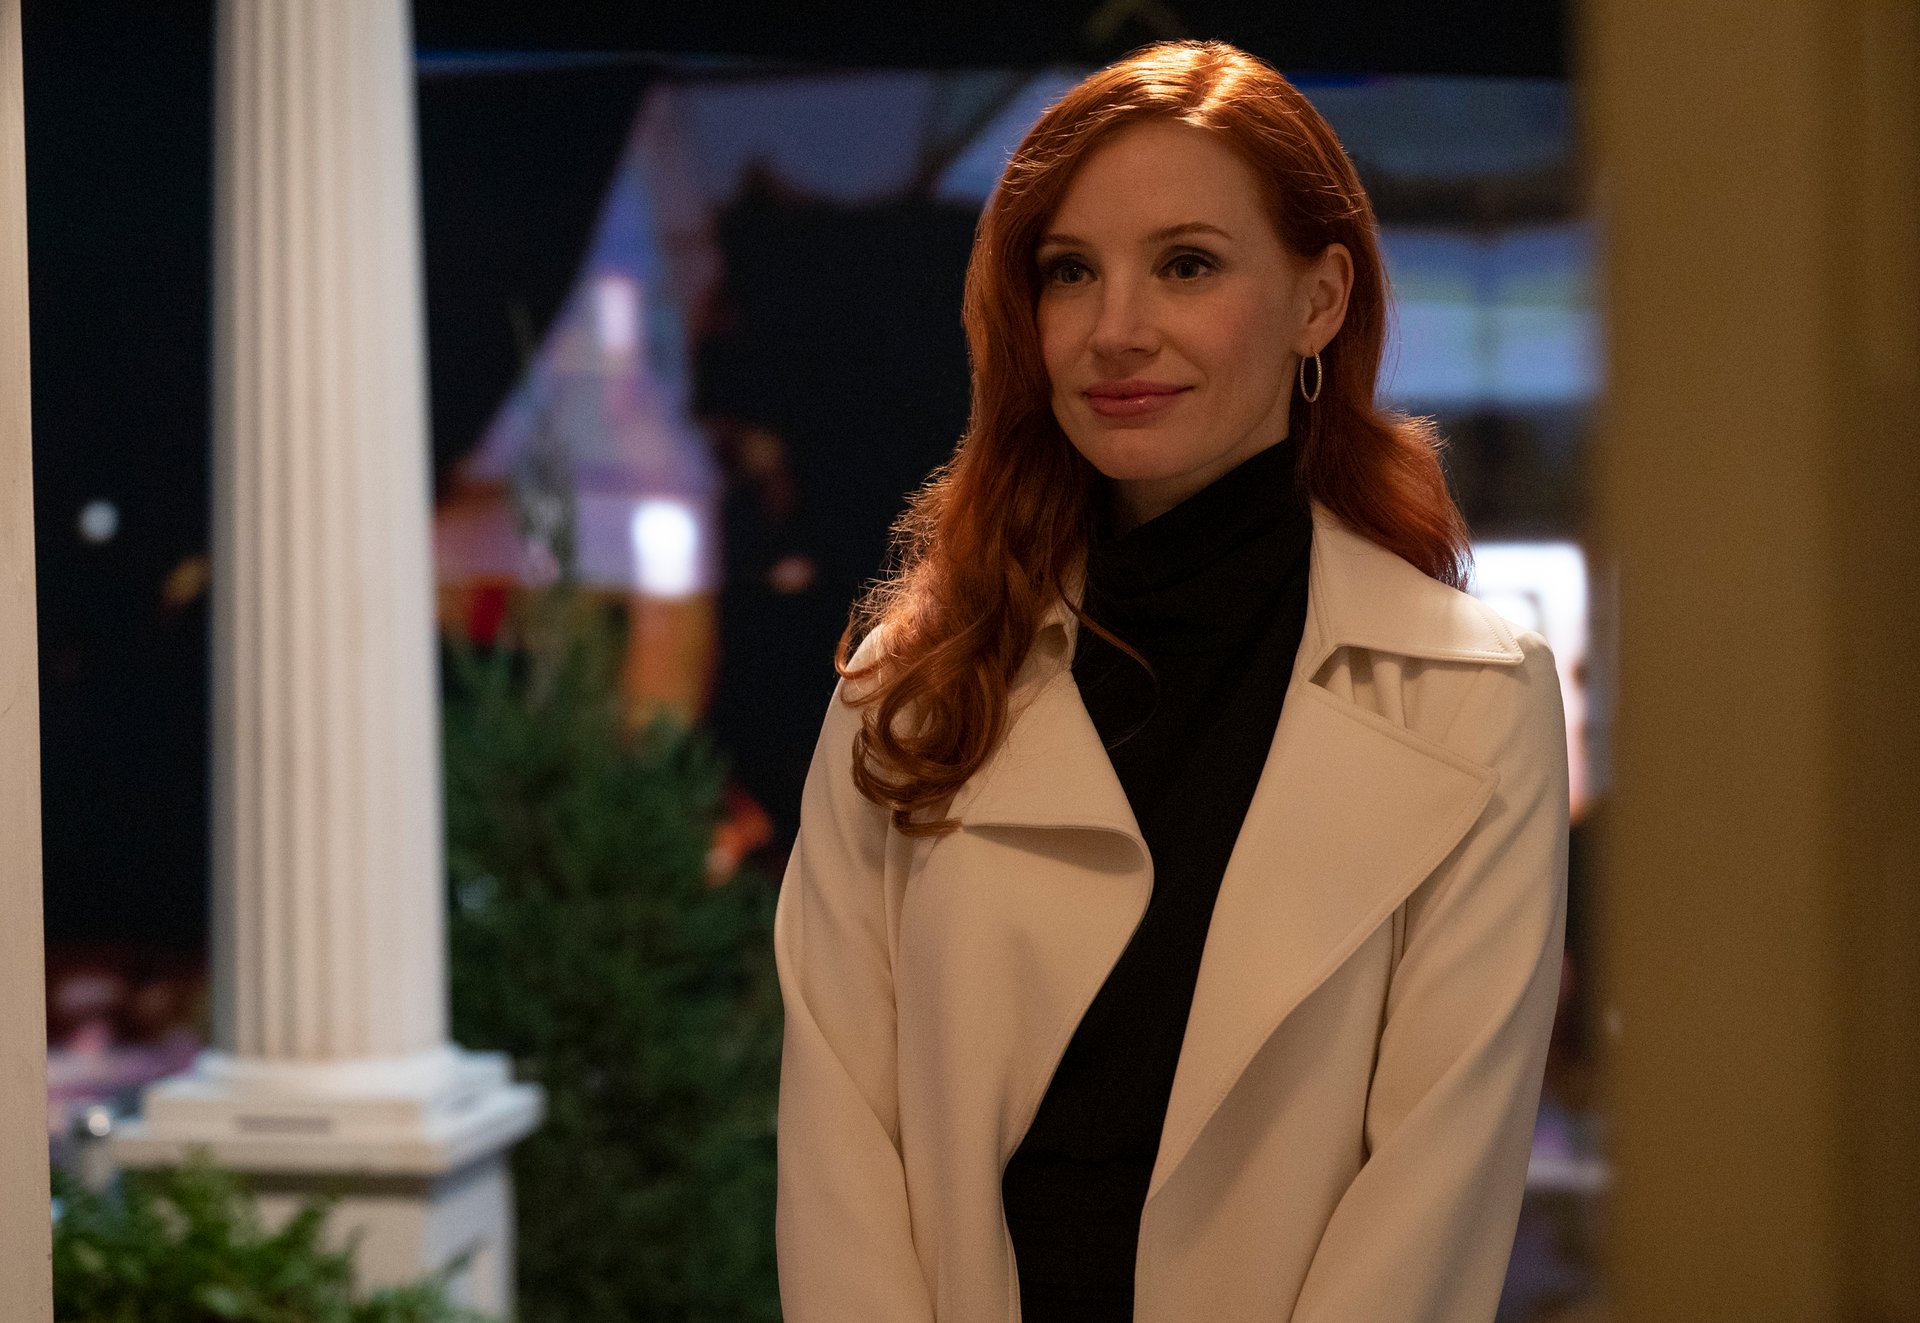 For our article about her 1 condition for doing nude scenes, Jessica Chastain as Mira in HBO Max's 'Scenes From a Marriage.' She's wearing a white coat and her red hair is down.